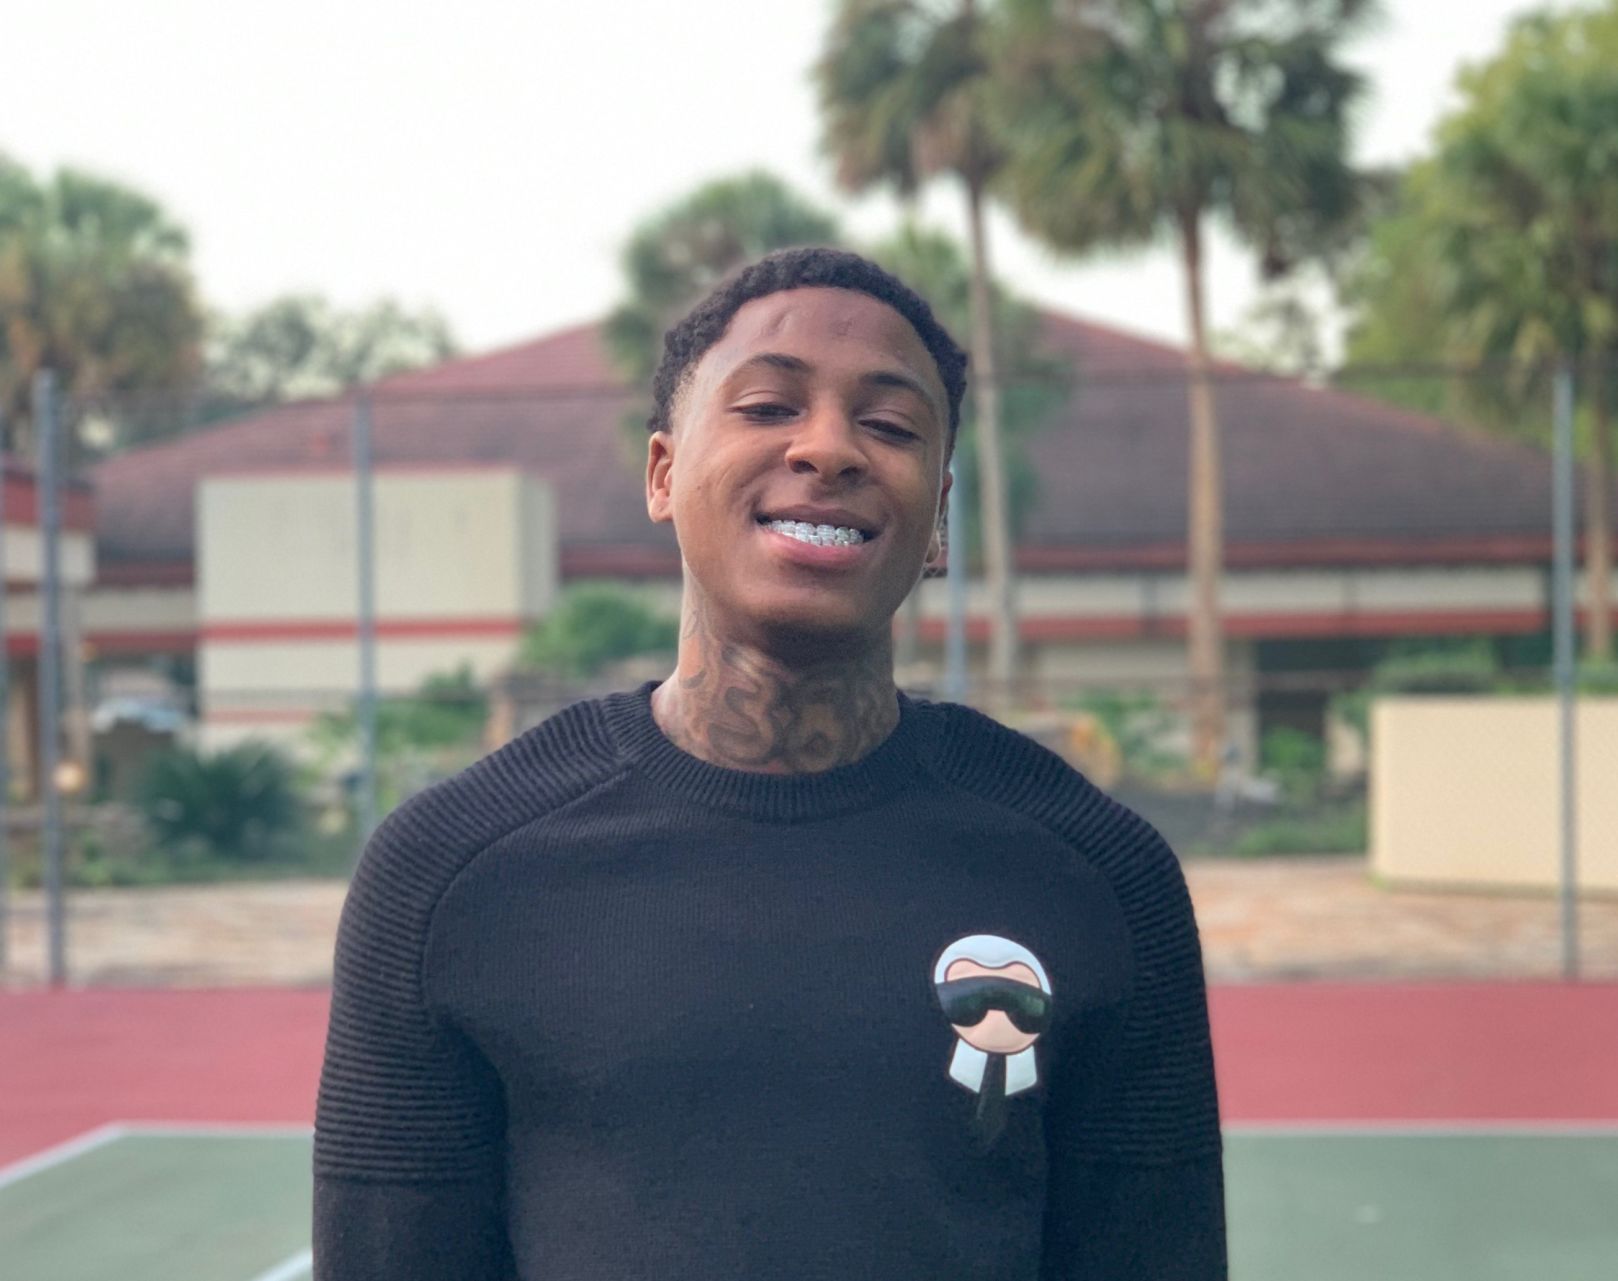 Kentrell DeSean Gaulden, known professionally as YoungBoy Never Broke Again